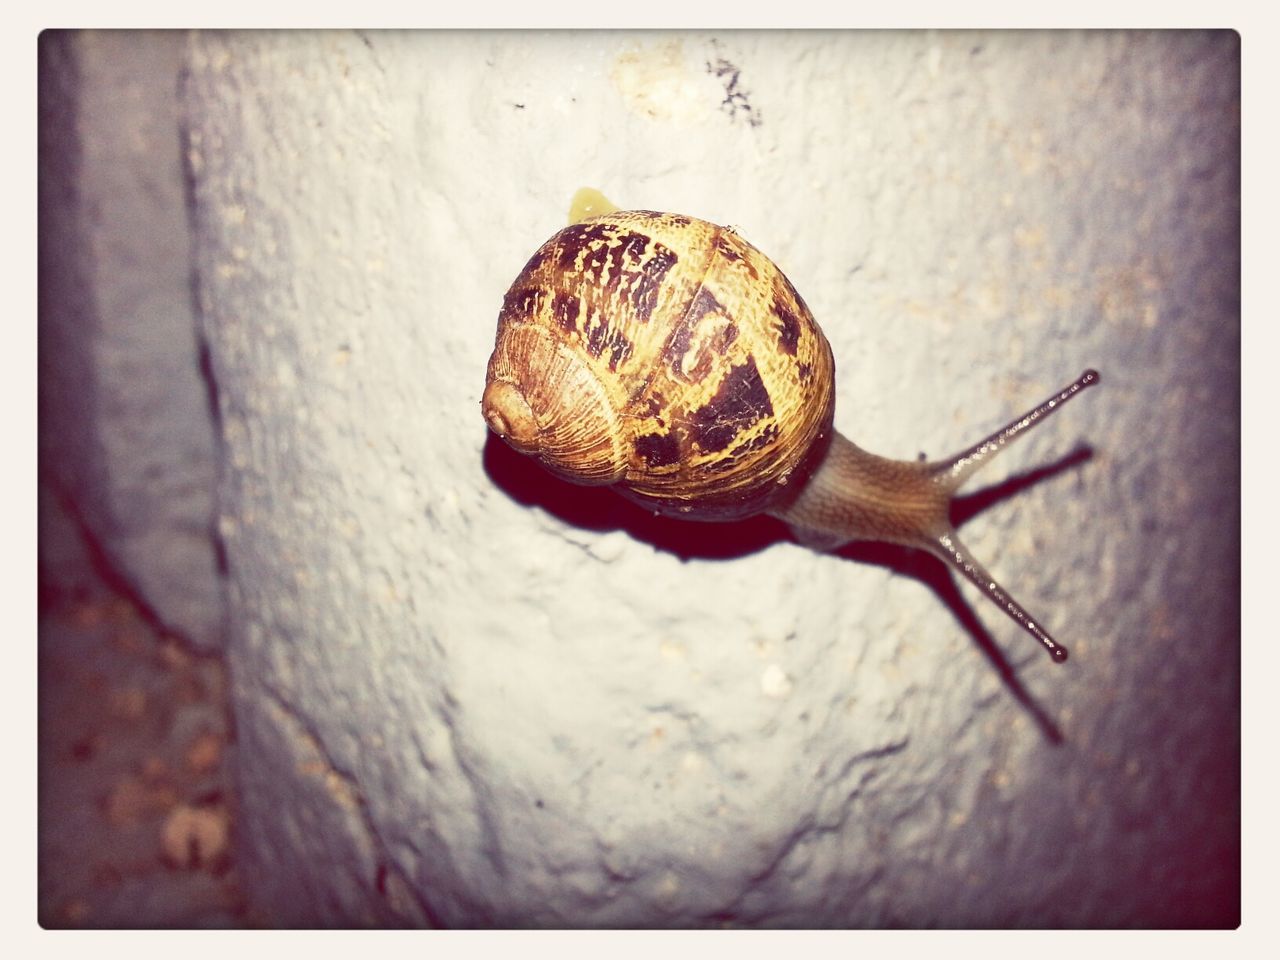 transfer print, one animal, animal themes, animals in the wild, wildlife, auto post production filter, close-up, wall - building feature, insect, built structure, outdoors, day, old, architecture, no people, building exterior, wall, animal shell, textured, snail